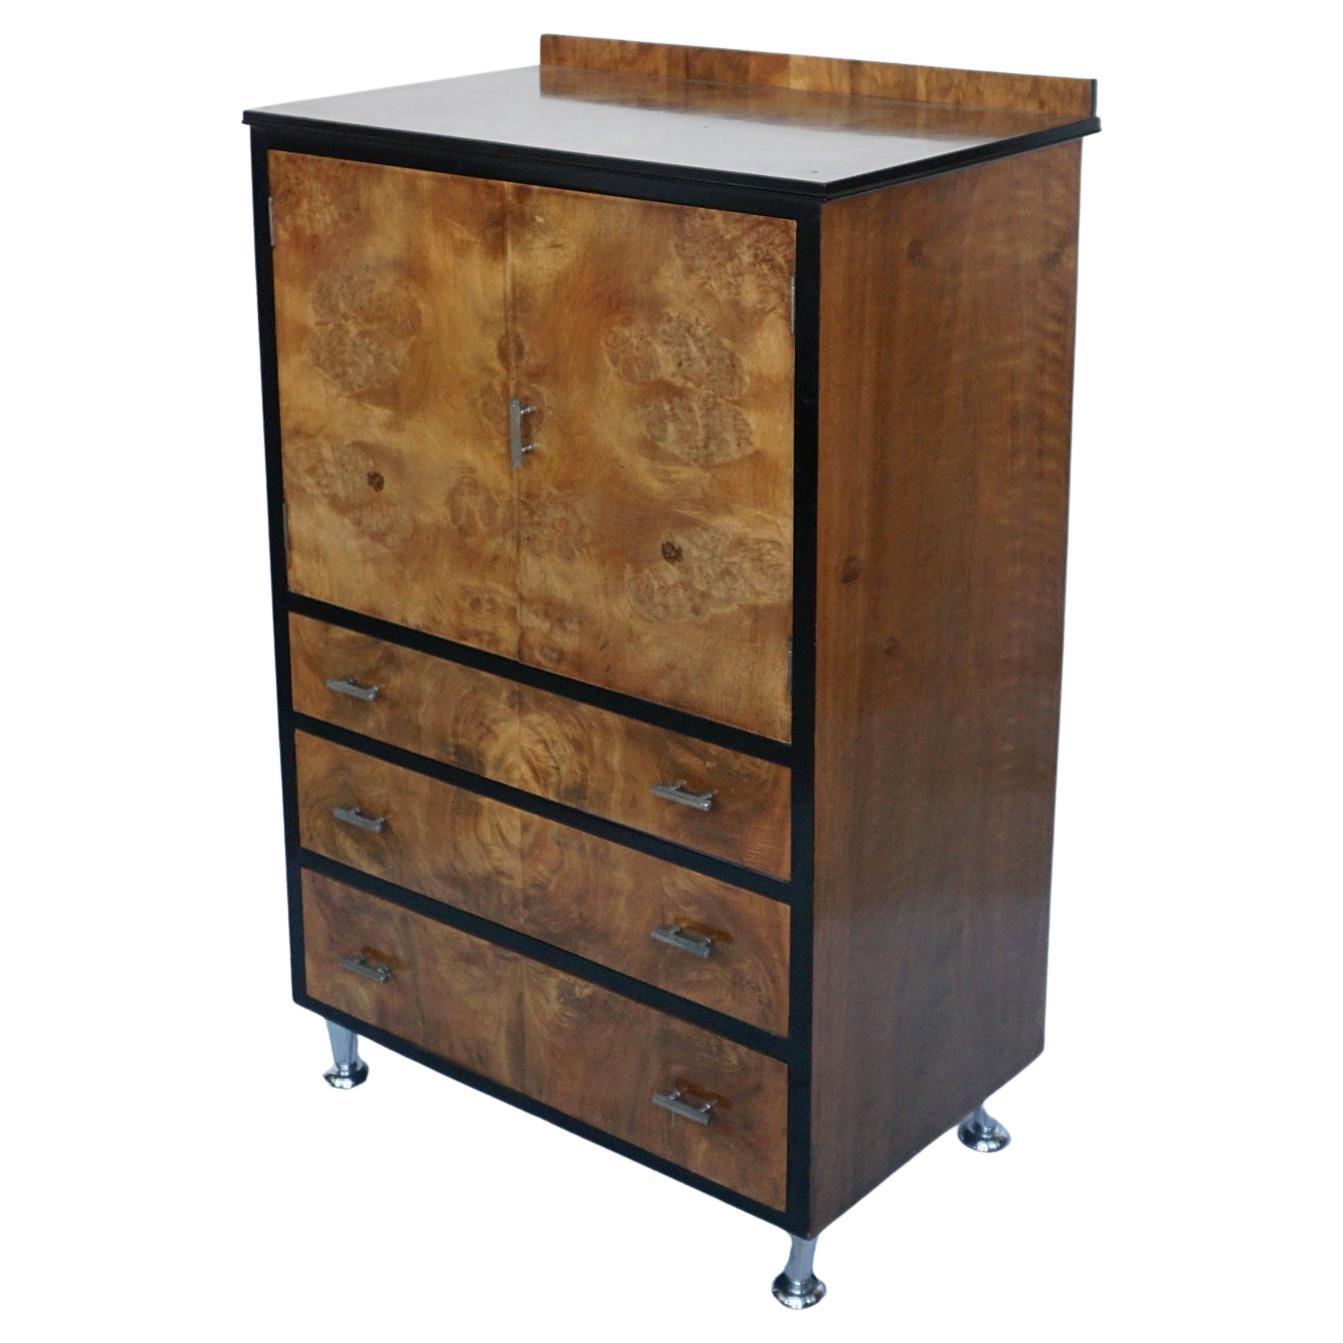 An Art Deco Tallboy Cabinet. Burr and Figured Walnut veneered with ebonised banding and original metal handles. 

Dimensions: H 120cm W 76cm D 49cm 

Origin: English

Date: Circa 1935

Item Number: 2704224

All of our furniture is